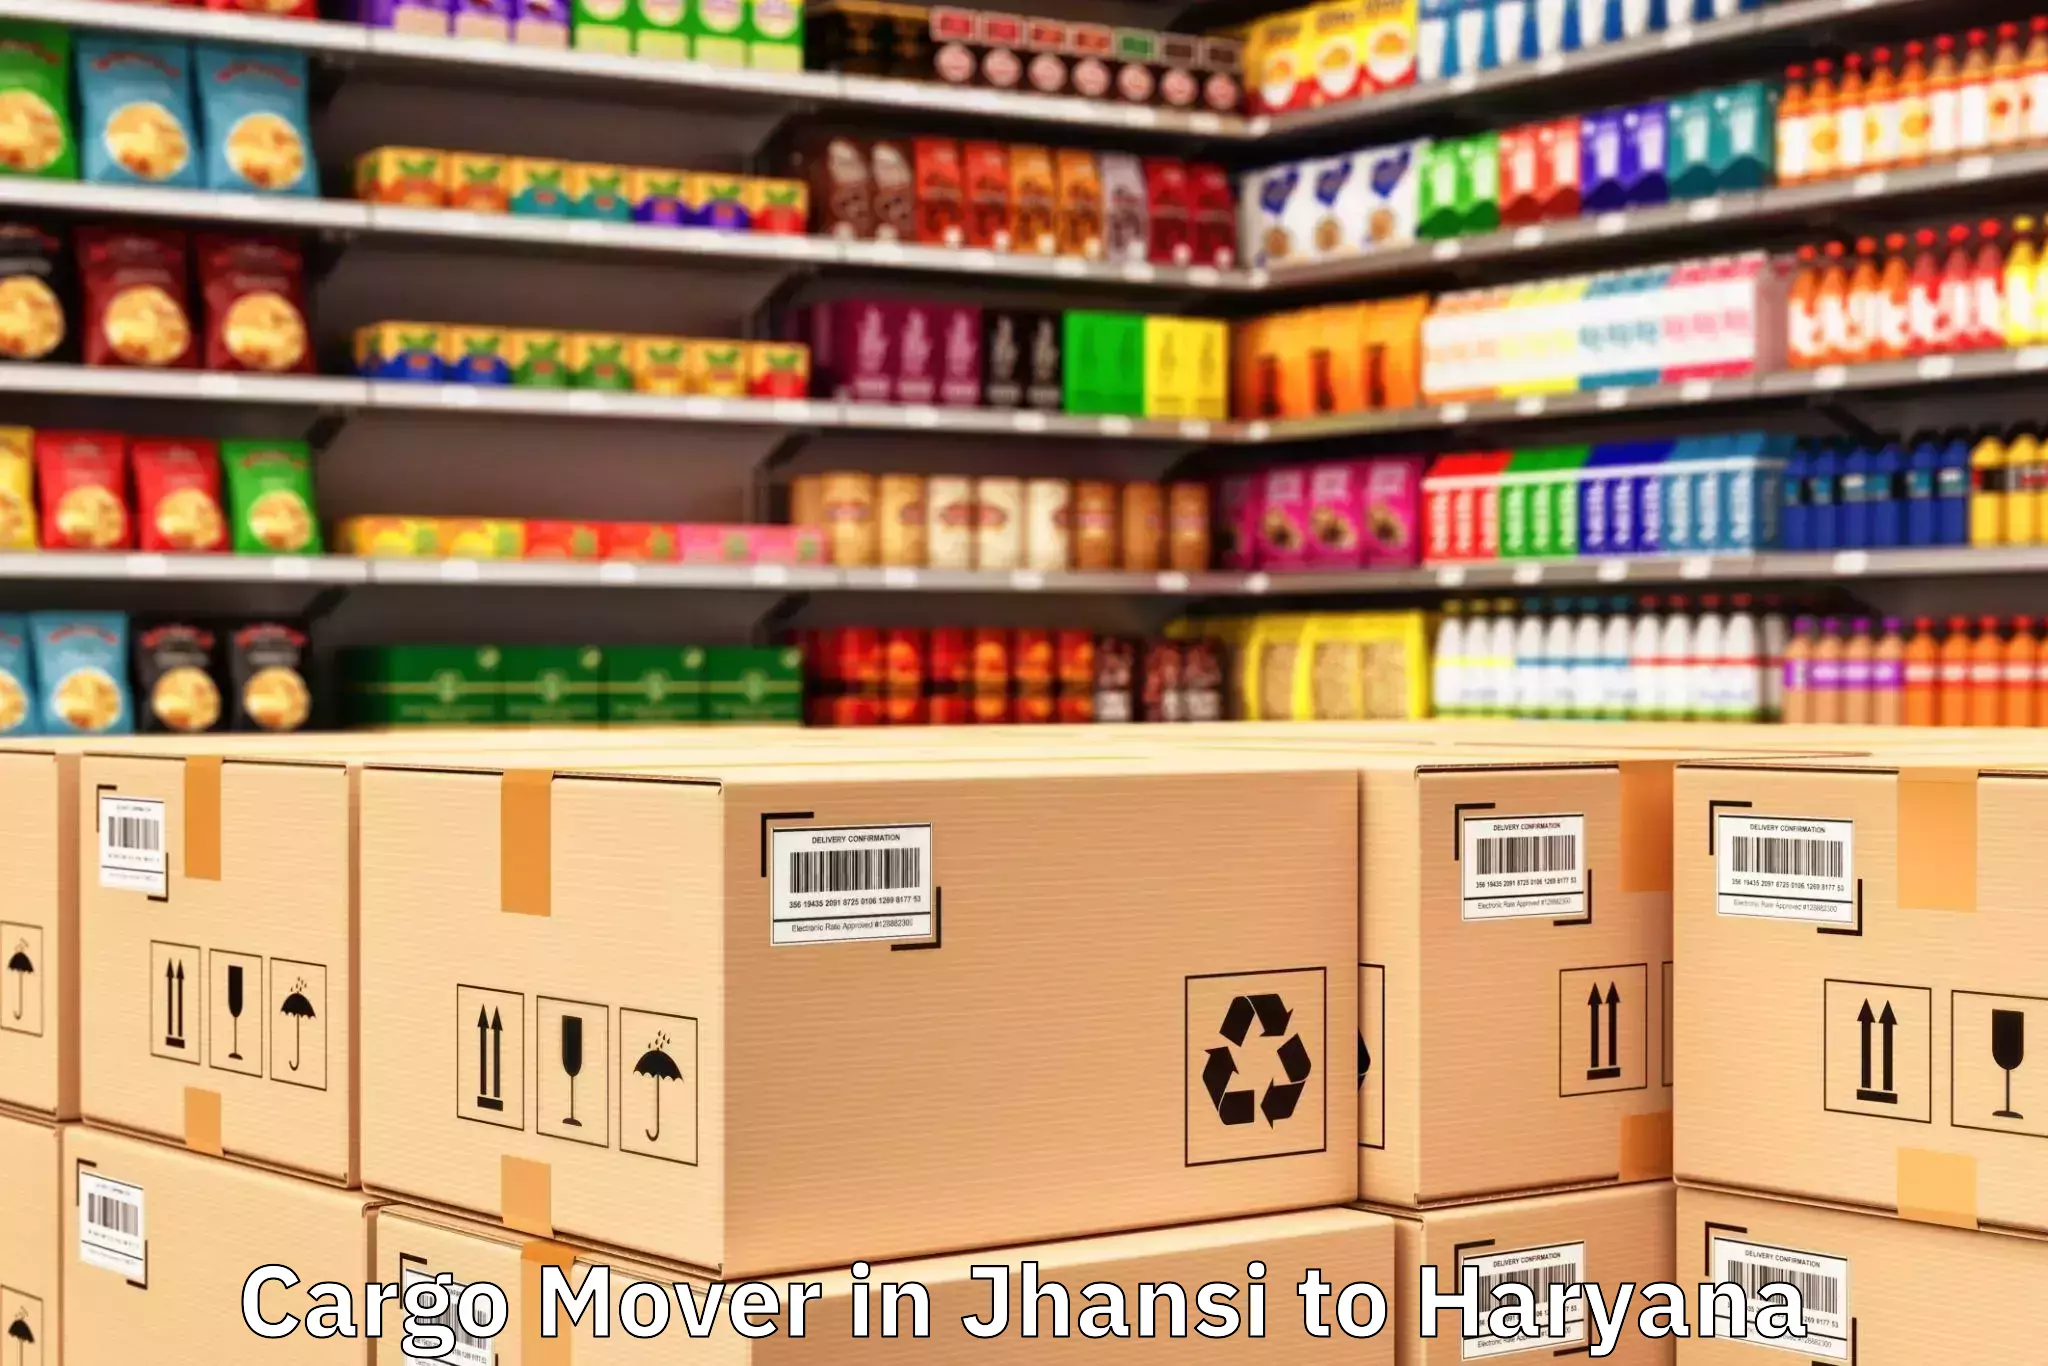 Easy Jhansi to Eros Ef3 Mall Cargo Mover Booking